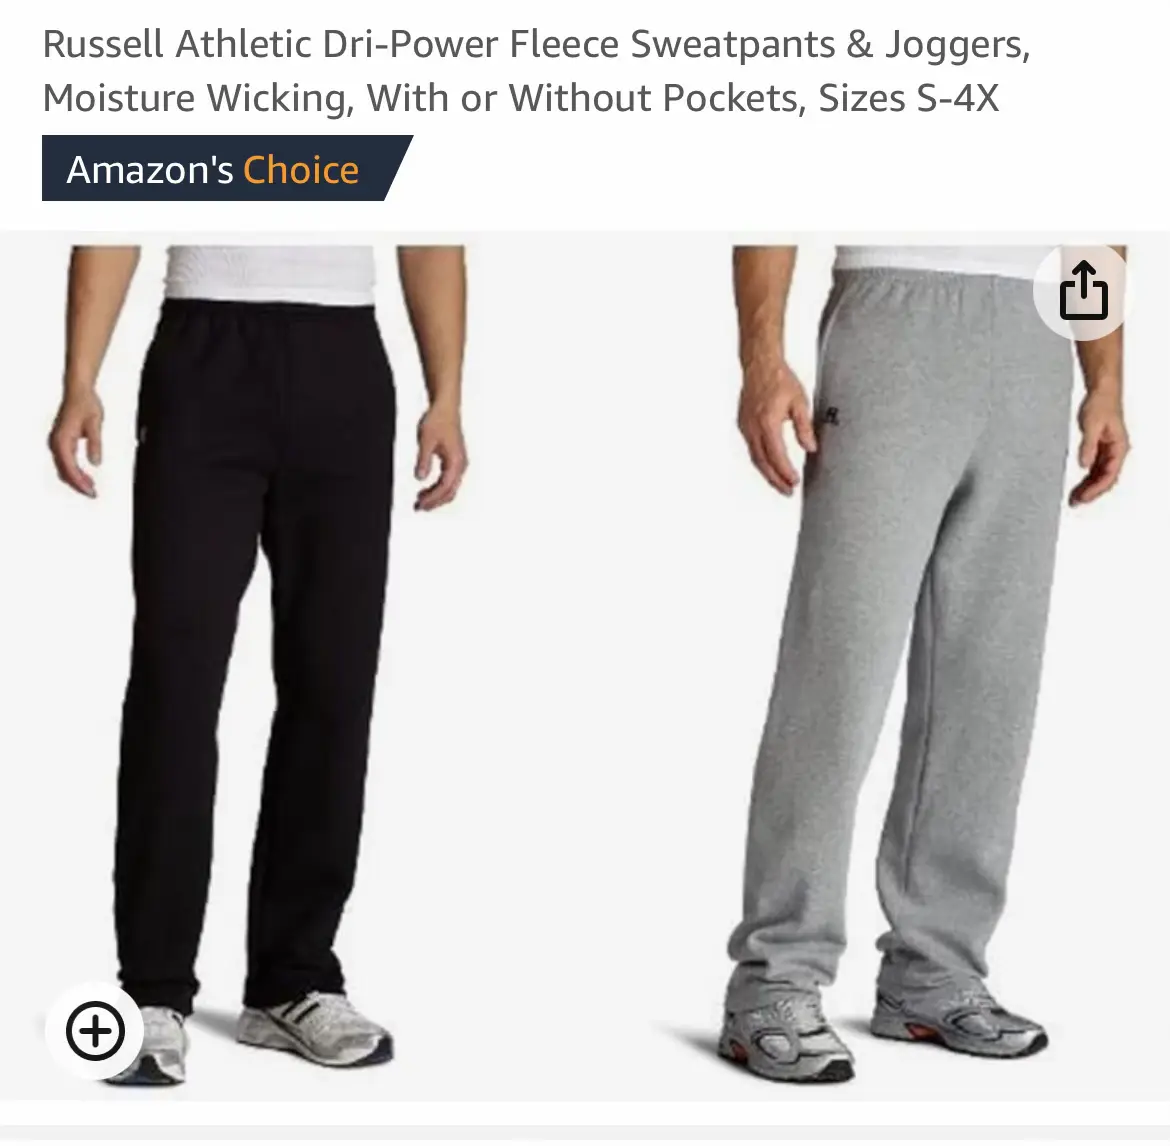 MNML LA CONTRAST BOOTCUT SWEATPANTS REVIEW + TRY ON 